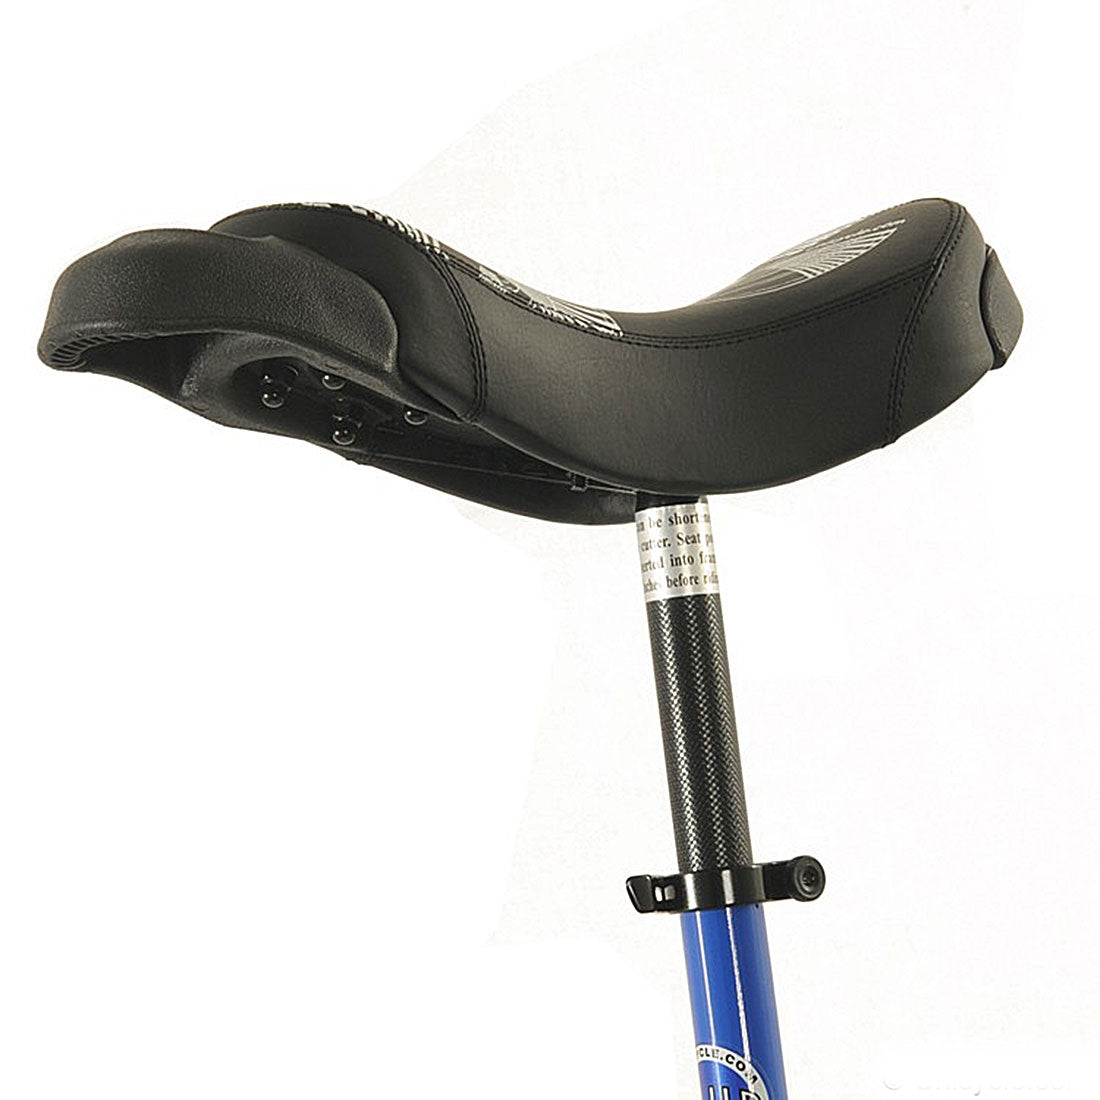 Club Freestyle 20inch Unicycle - Blue/Black Other Fun Toys